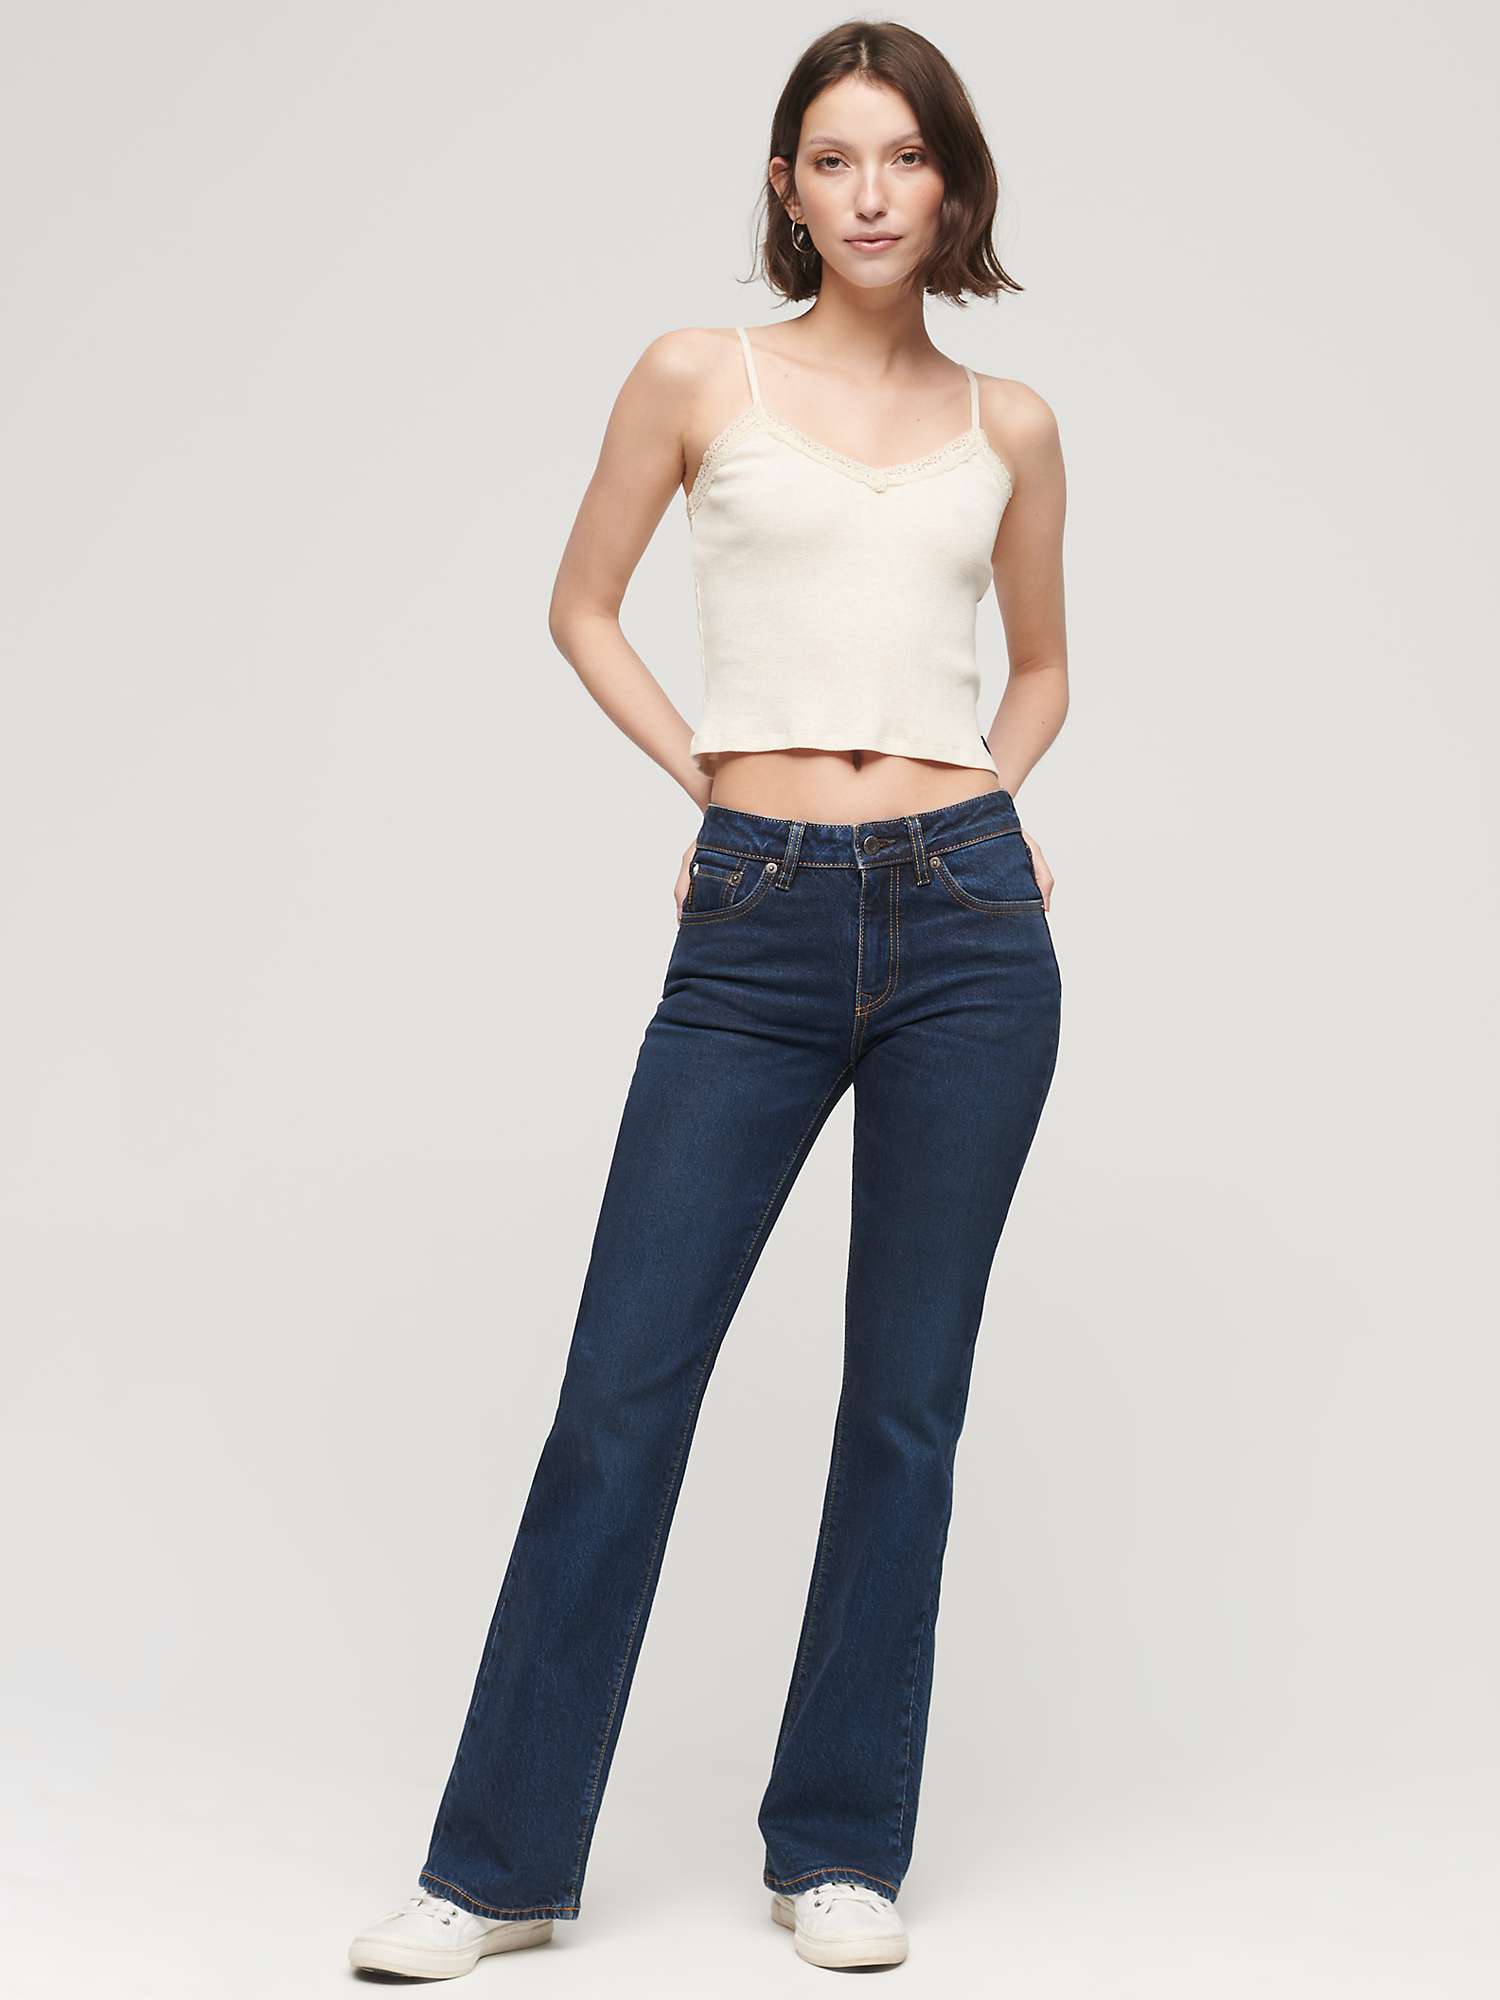 Buy Superdry Organic Cotton Mid Rise Slim Flare Jeans Online at johnlewis.com